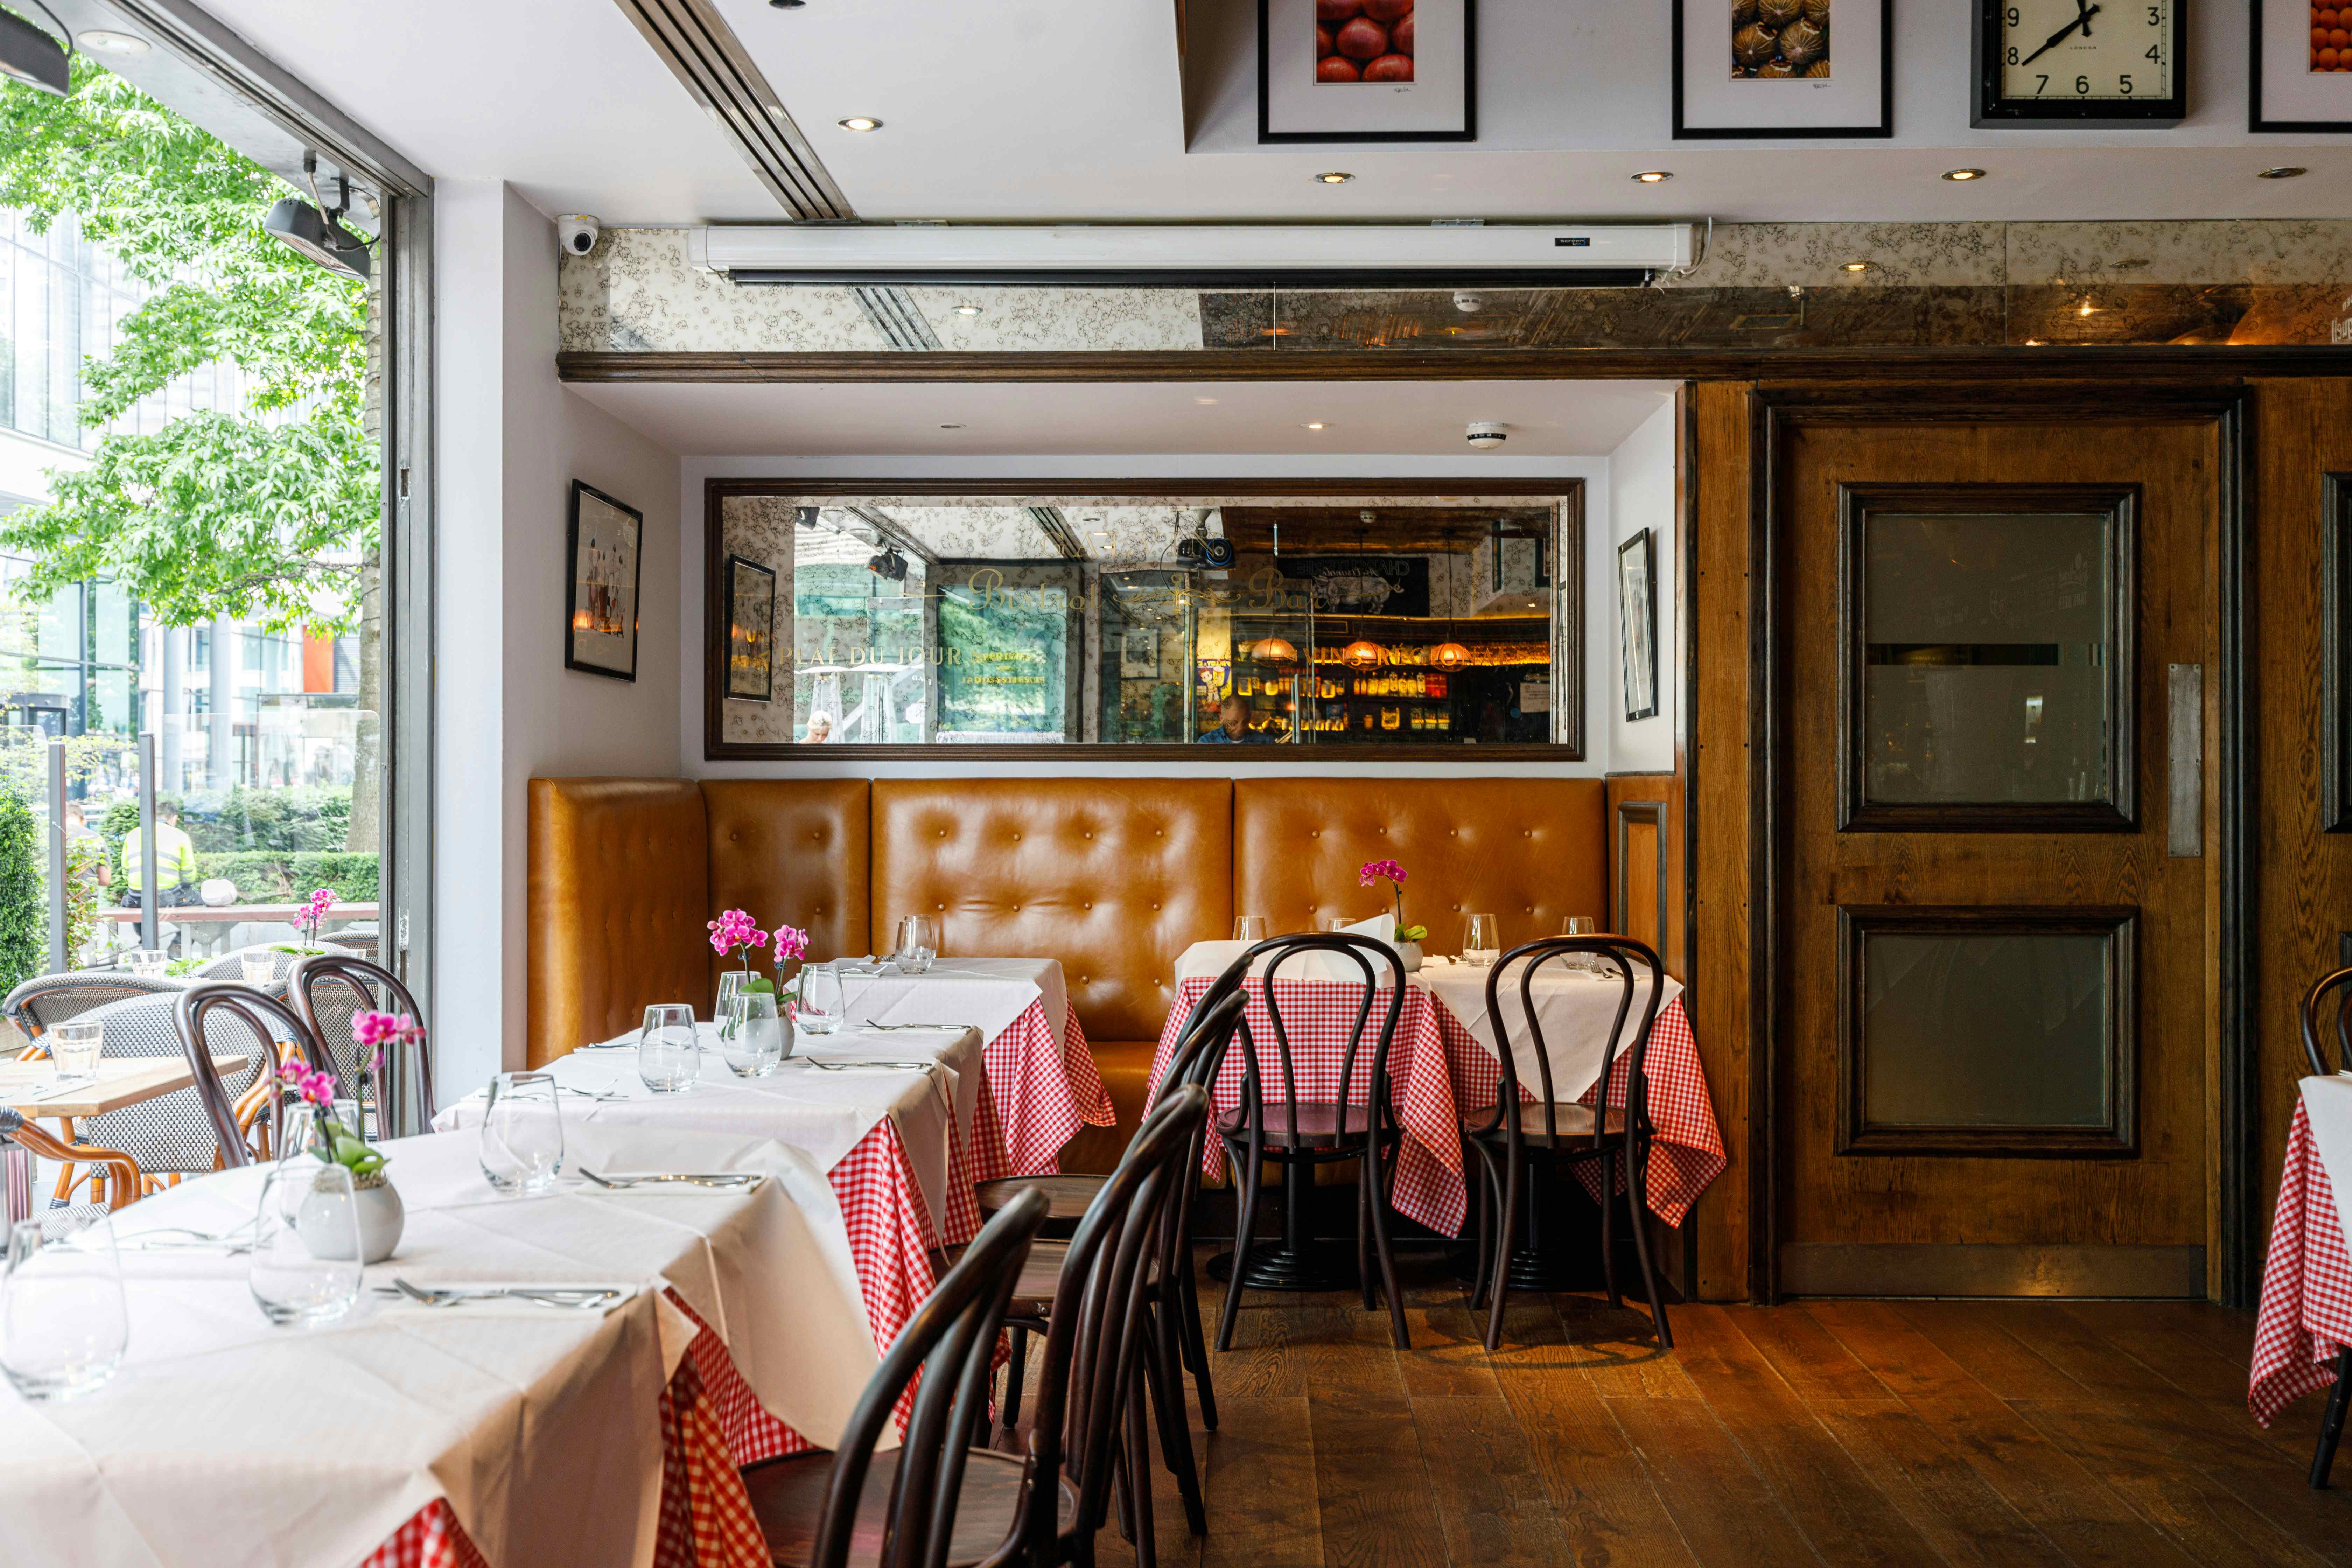 Exclusive Hire, Galvin Bistrot & Bar